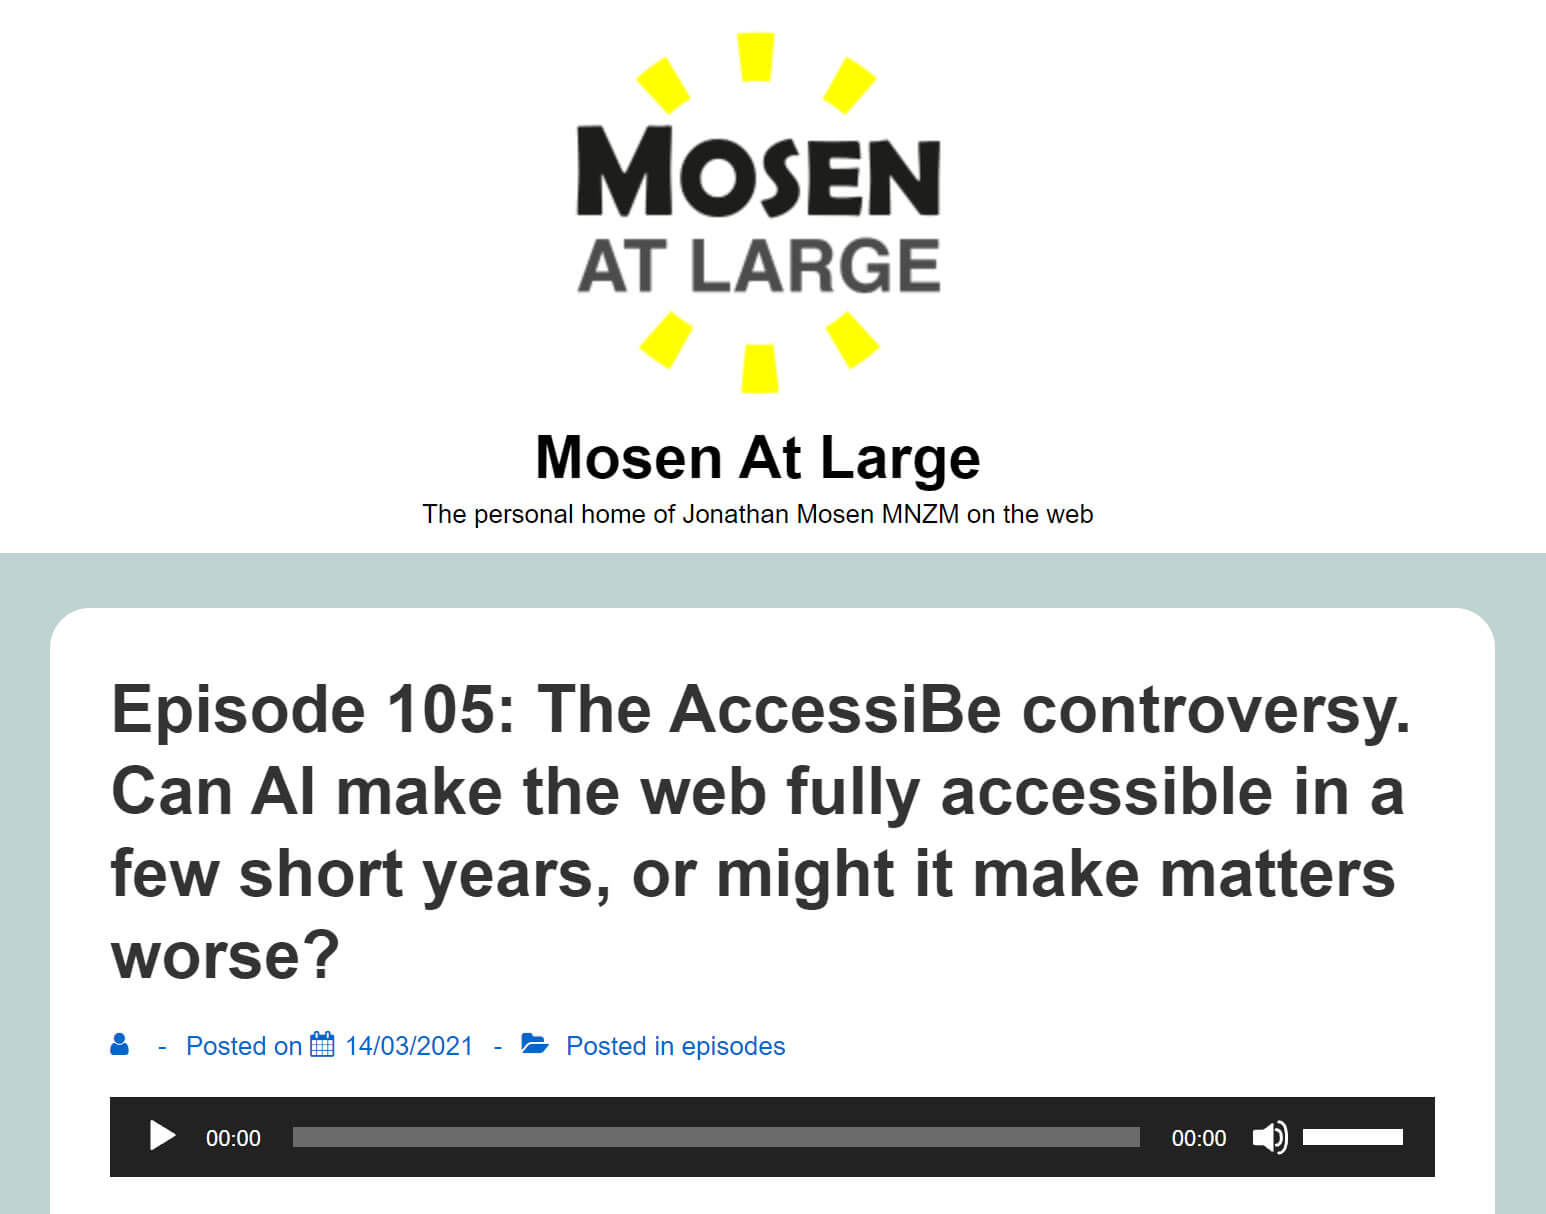 Mosen at Large: Episode 105: The AccessiBe controversy. Can AI make the web fully accessible in a few short years, or might it make matters worse?